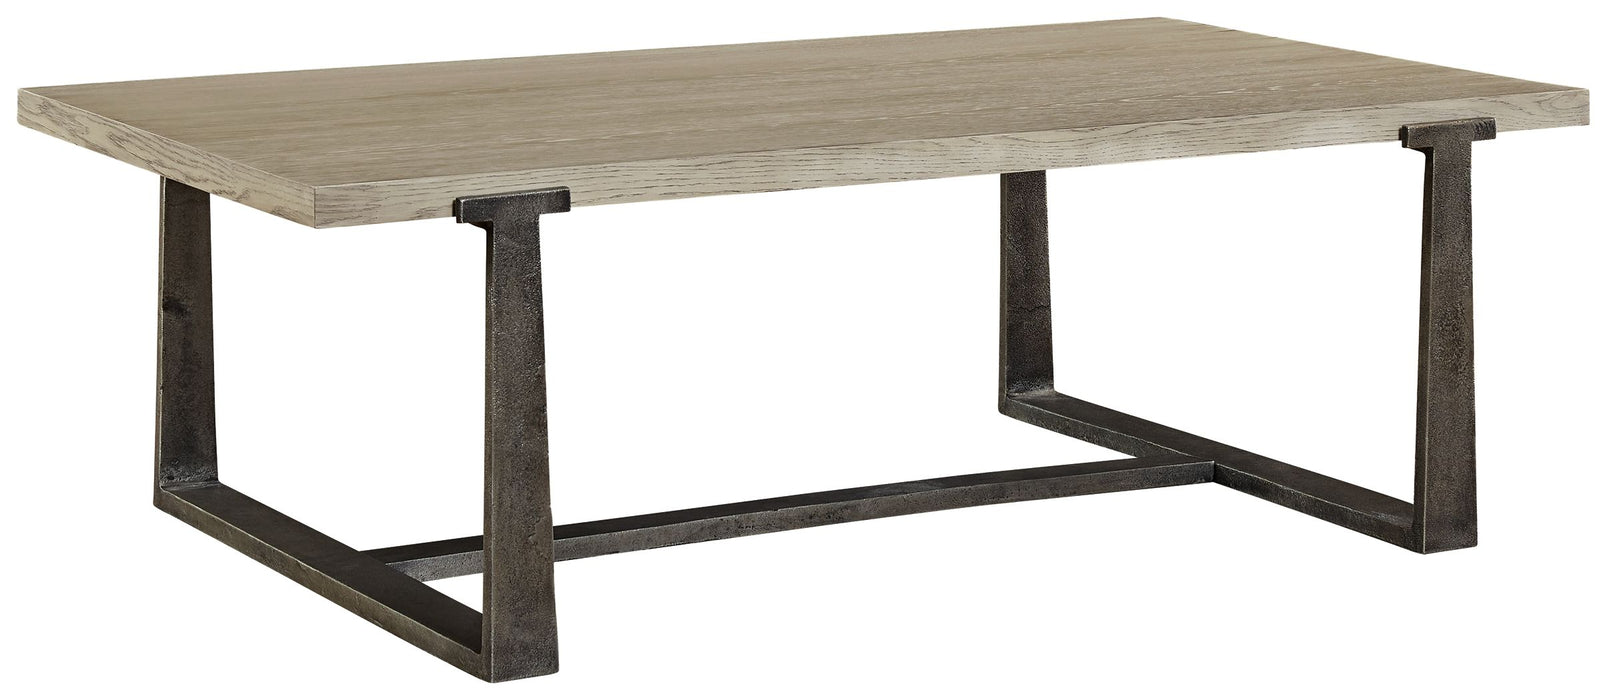 Dalenville - Gray - Rectangular Cocktail Table